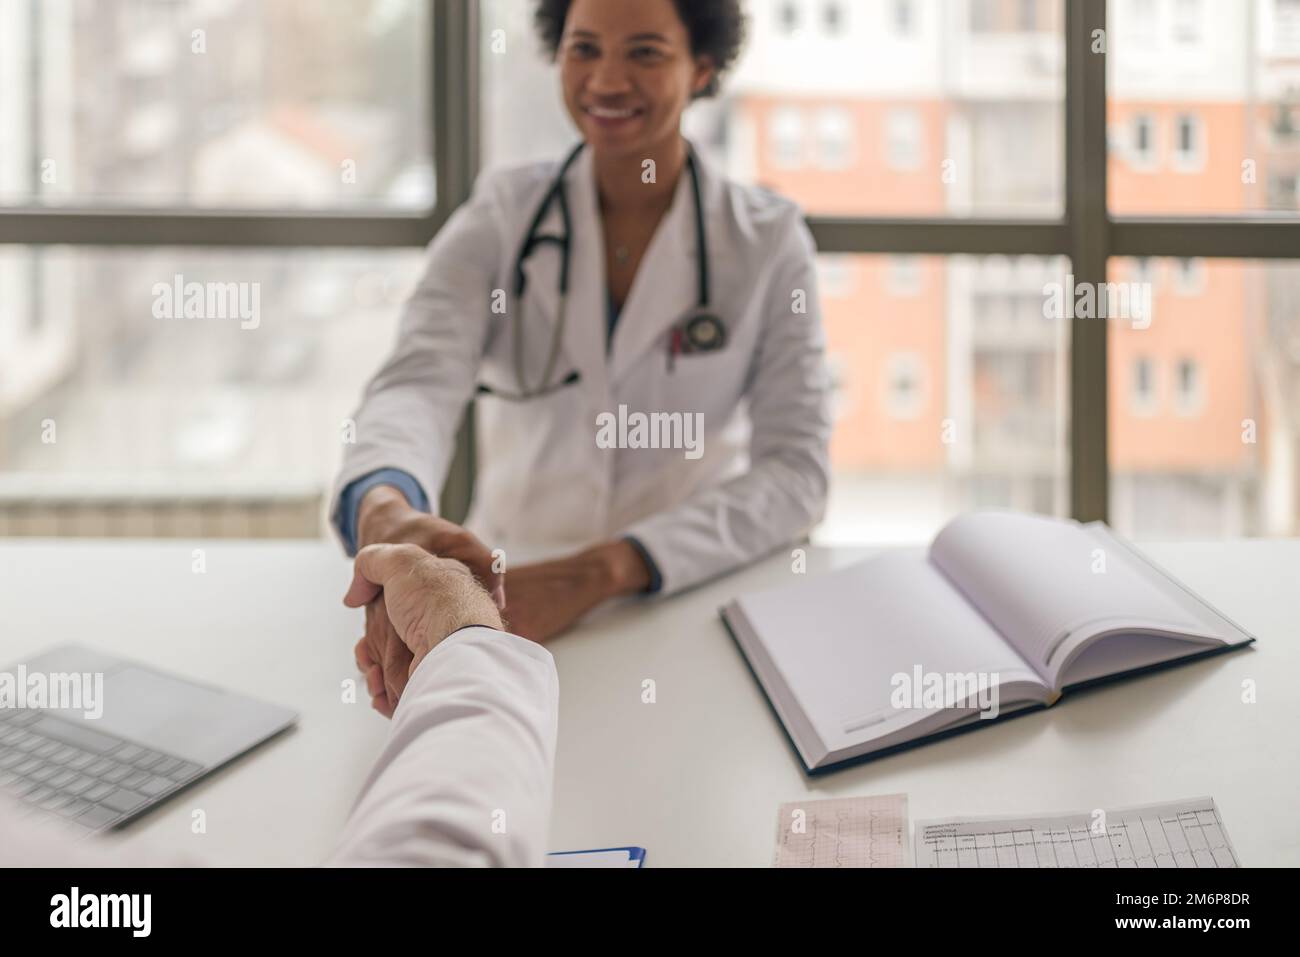 Excited adult female intern, wearing a stethoscope, starting work as a hospital intern, handshake. Stock Photo